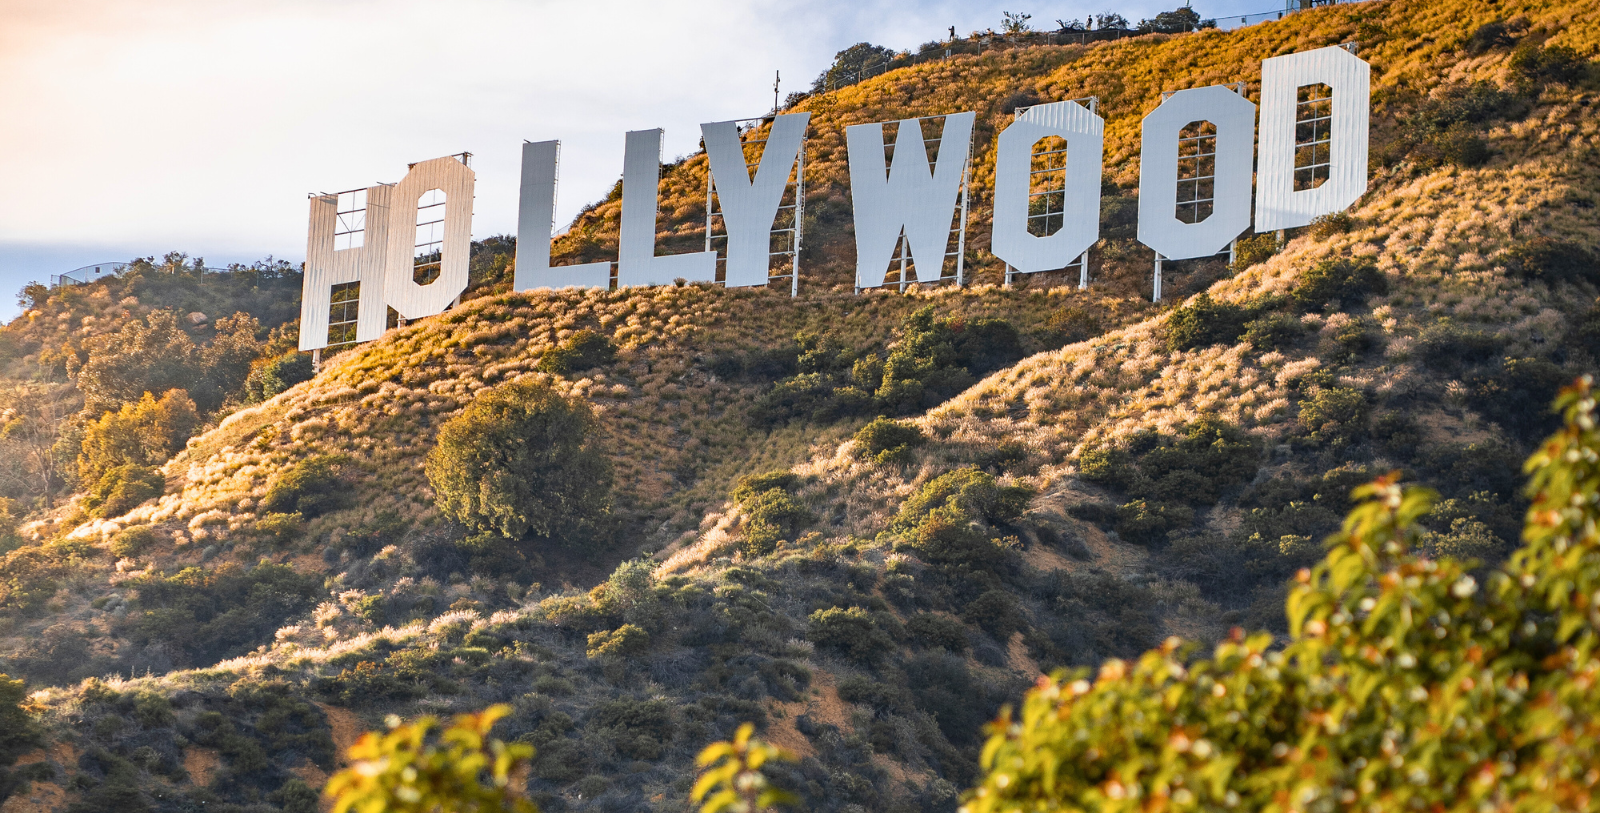 Experience the iconic Hollywood Sign from popular vantage points like Lake Hollywood Park and the Griffith Observatory.